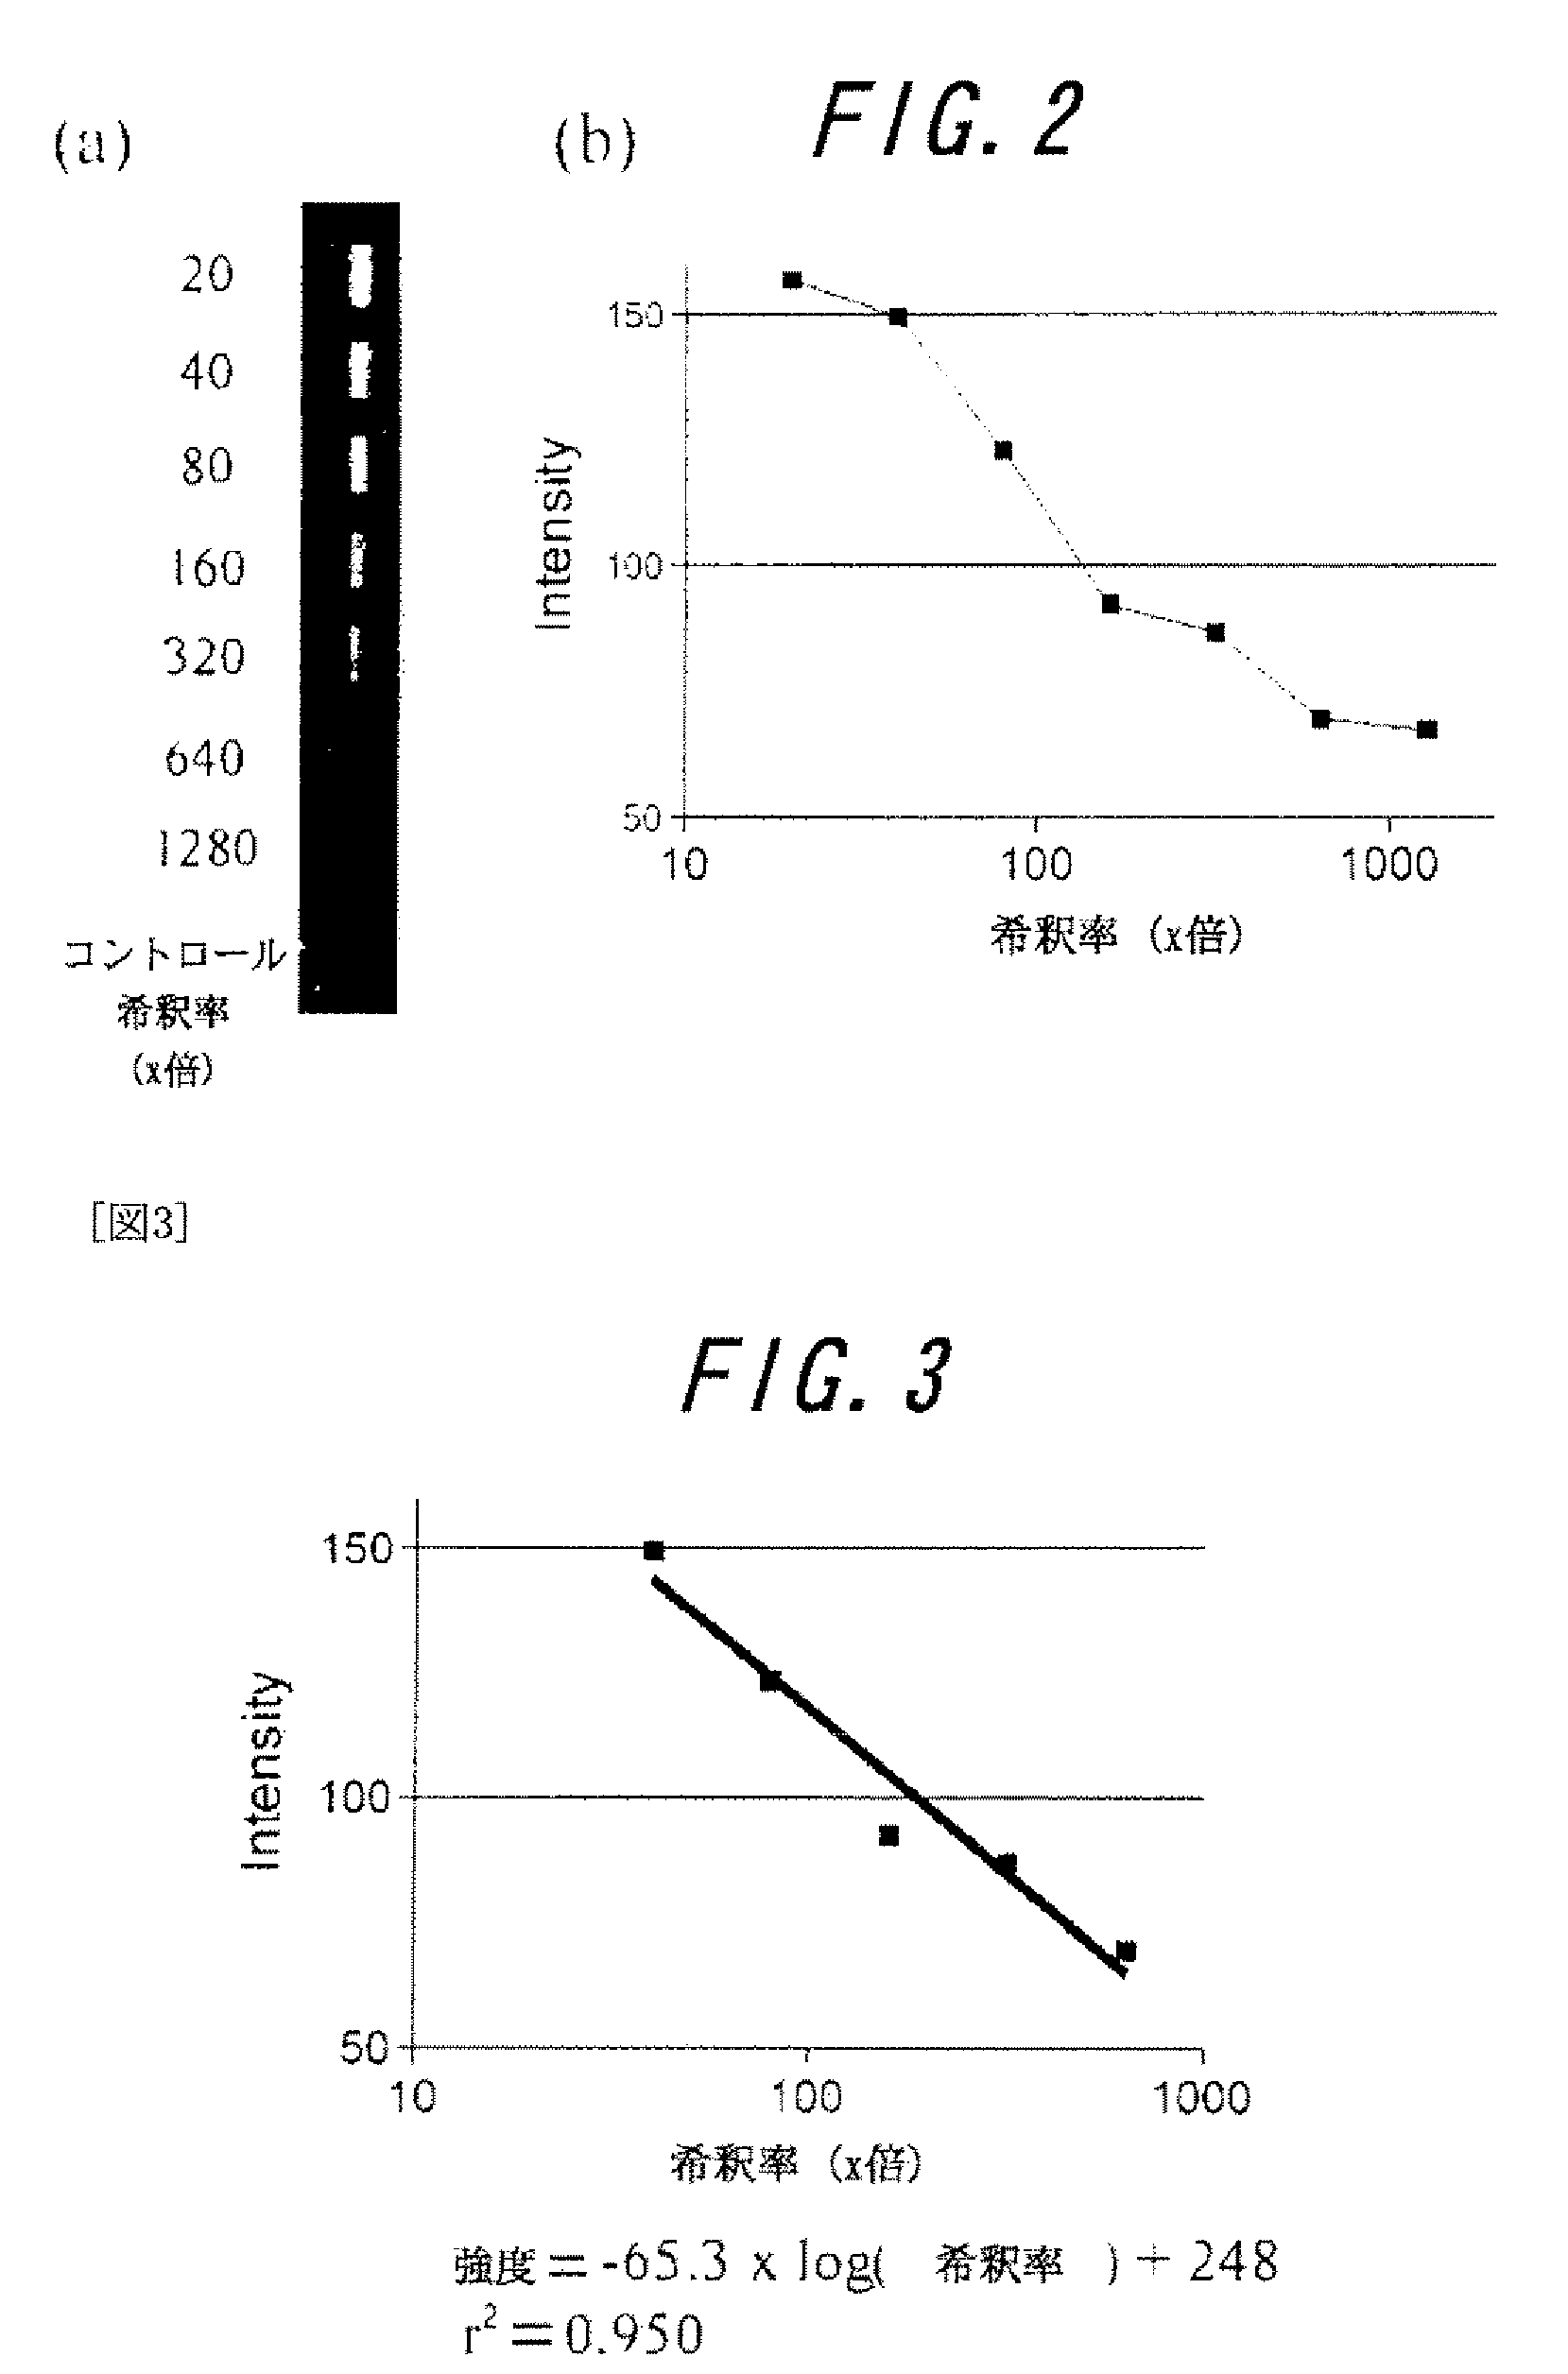 Method of Monitoring a Microorganism That Causes Infectious Disease of a Laboratory Animal